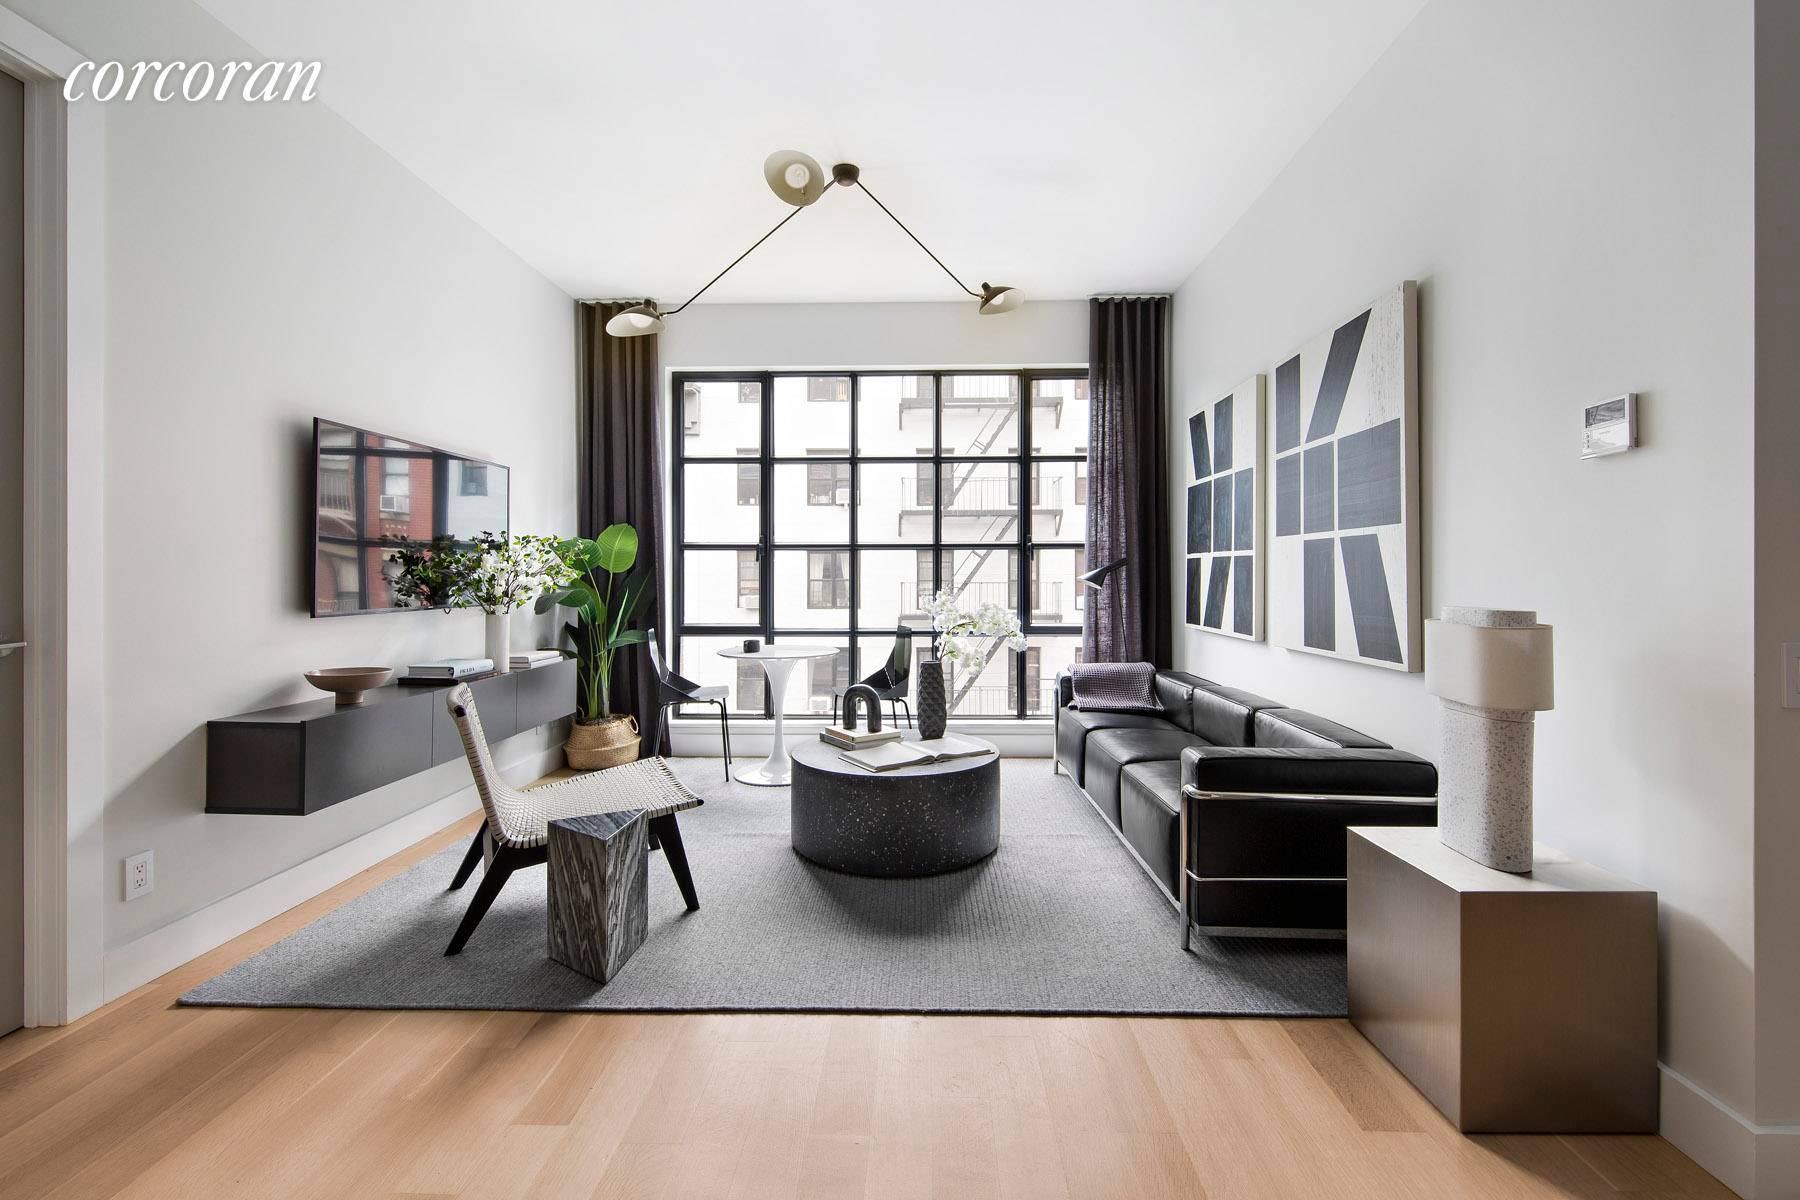 Perfectly positioned in the heart of the Lower East Side, 147 Ludlow comprises an exquisitely designed and executed collection of 8 luxury lofts in a prime downtown location.